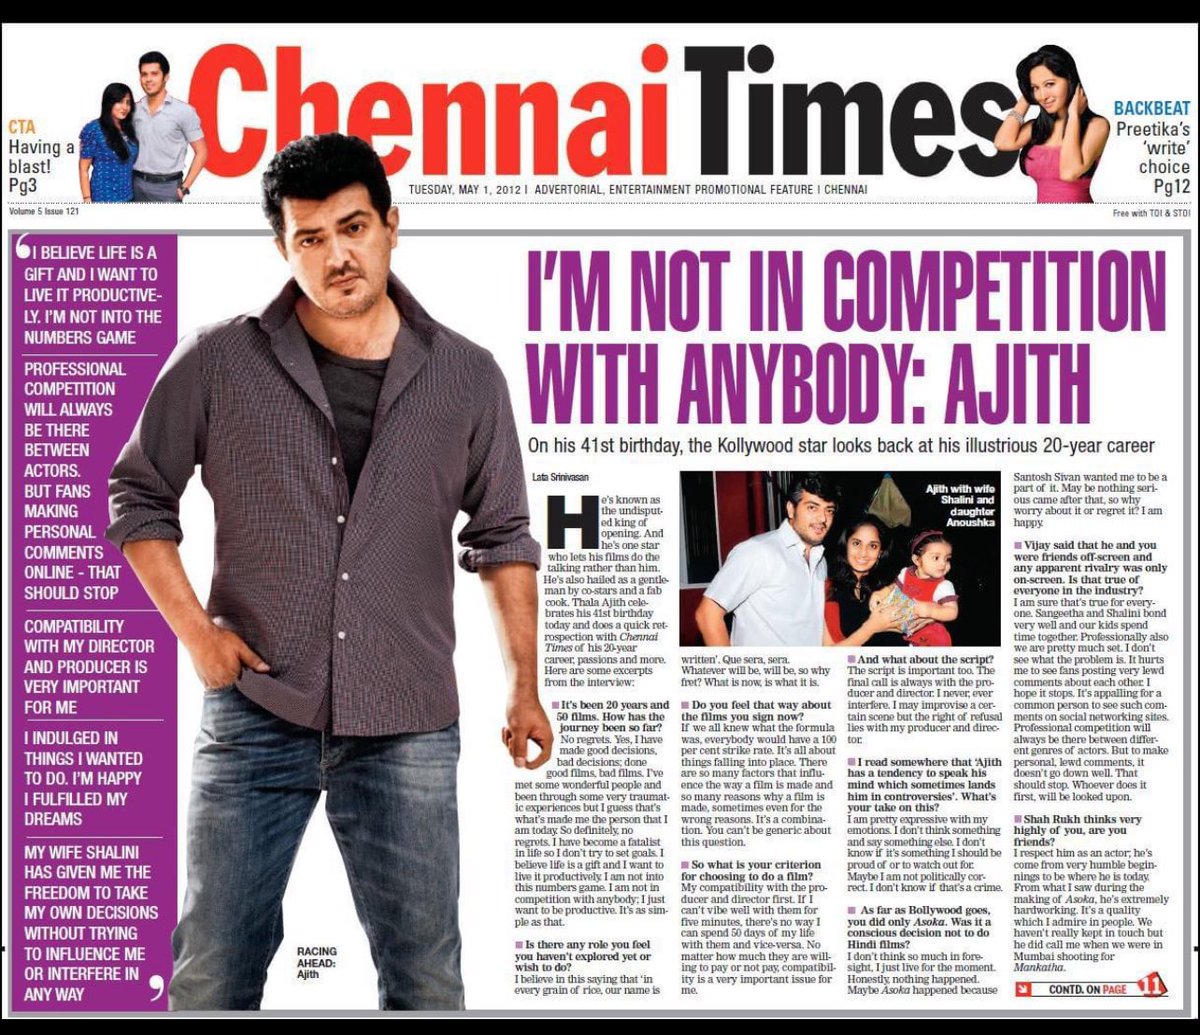 throwback to 2012 when I interviewed #AjithKumar for his birthday and he told me it was one of his best interviews! #HappyBirthdayAjithKumar #HappyBirthdayAK @DoneChannel1 @SureshChandraa